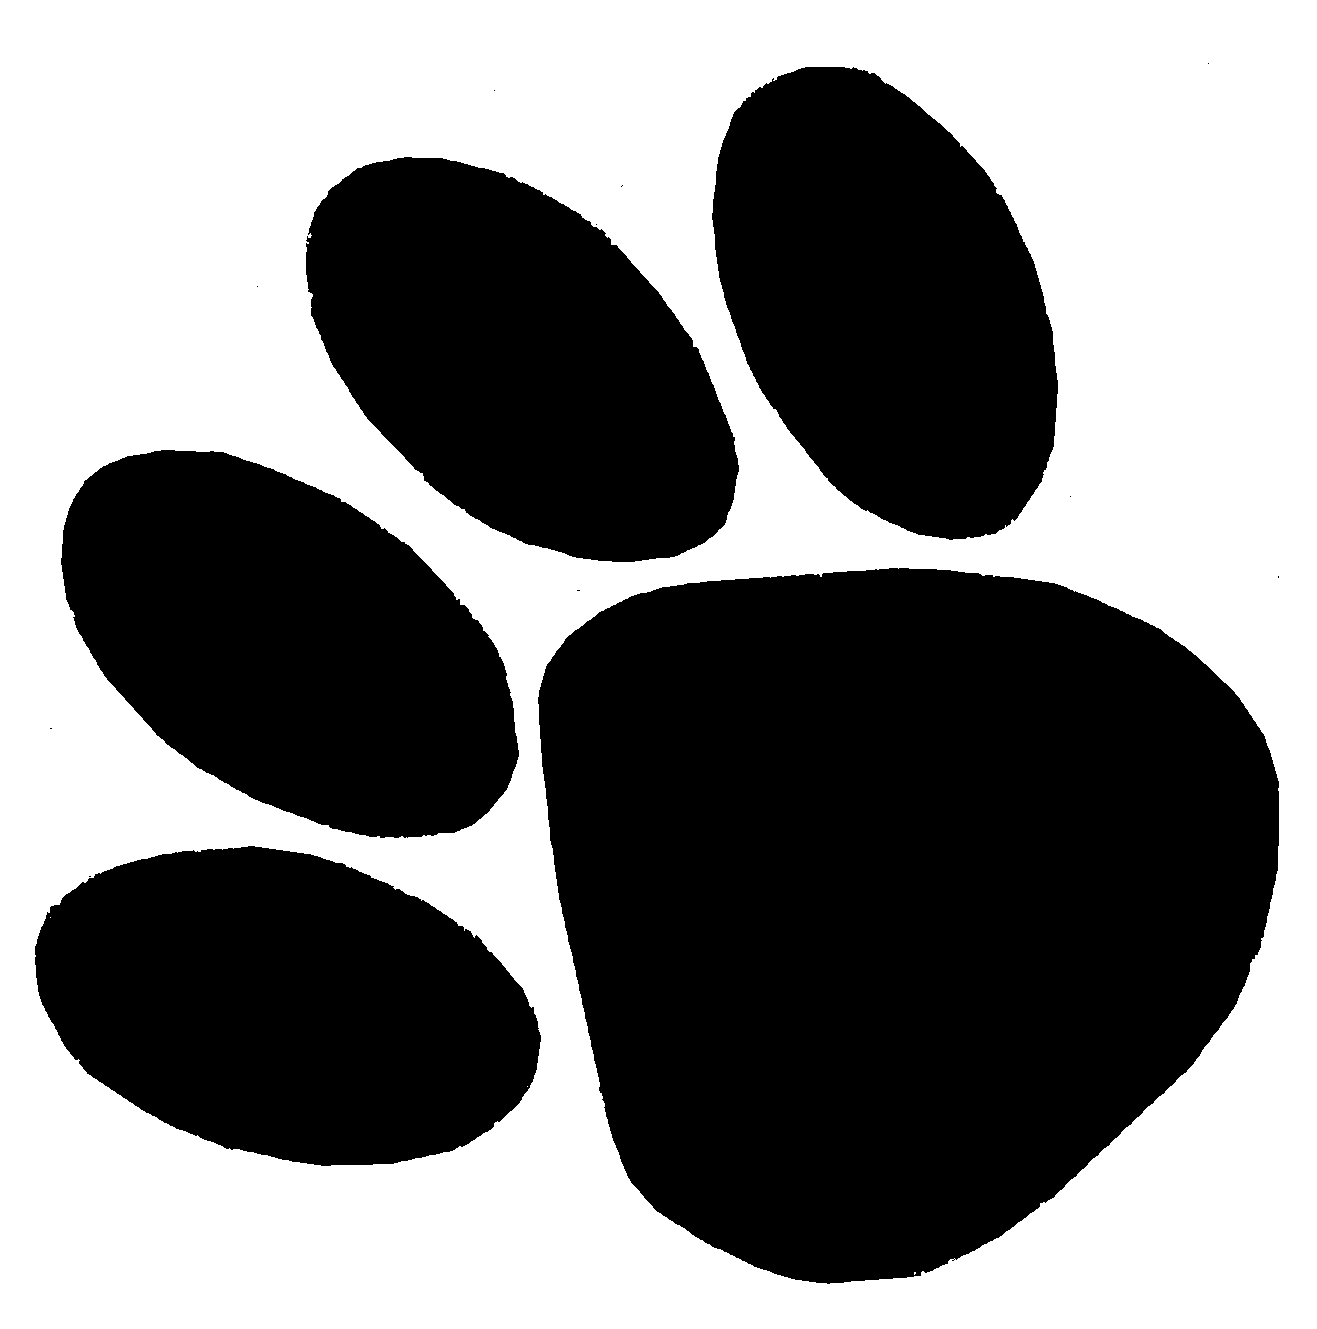 Dog Paw Print Template - ClipArt Best